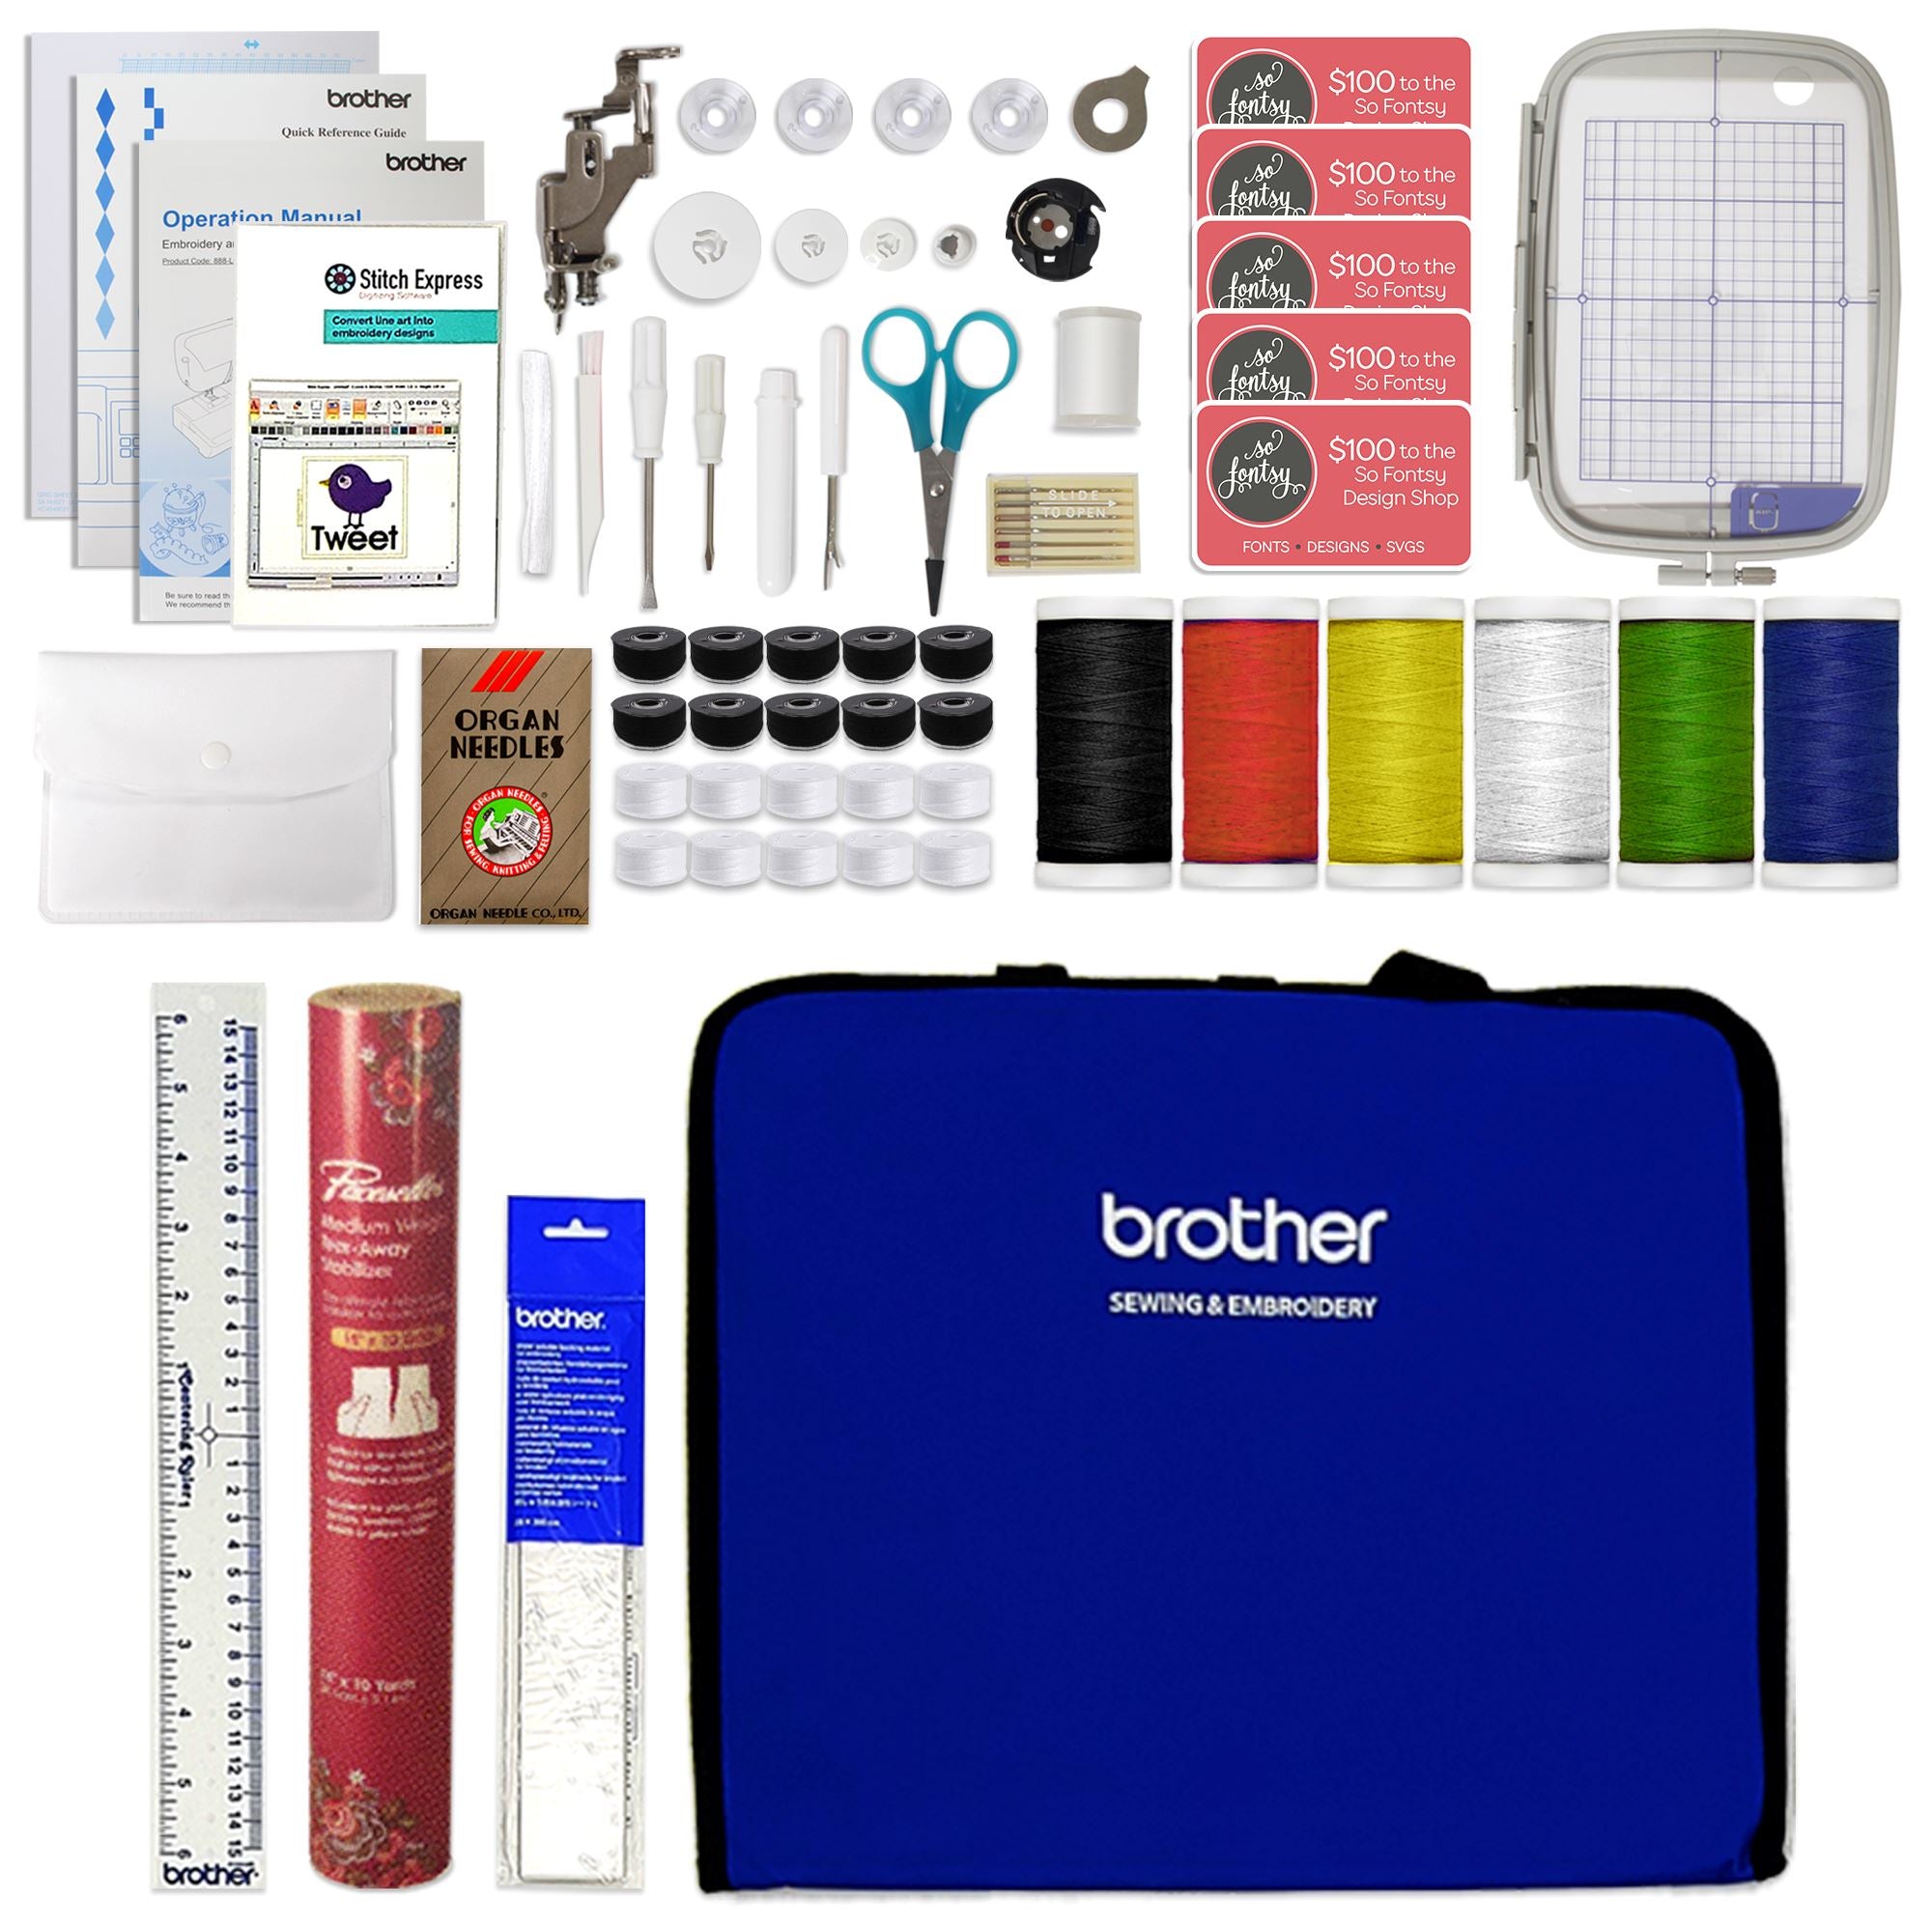 Brother PE900 5x7 Embroidery Field - FREE Shipping over $49.99